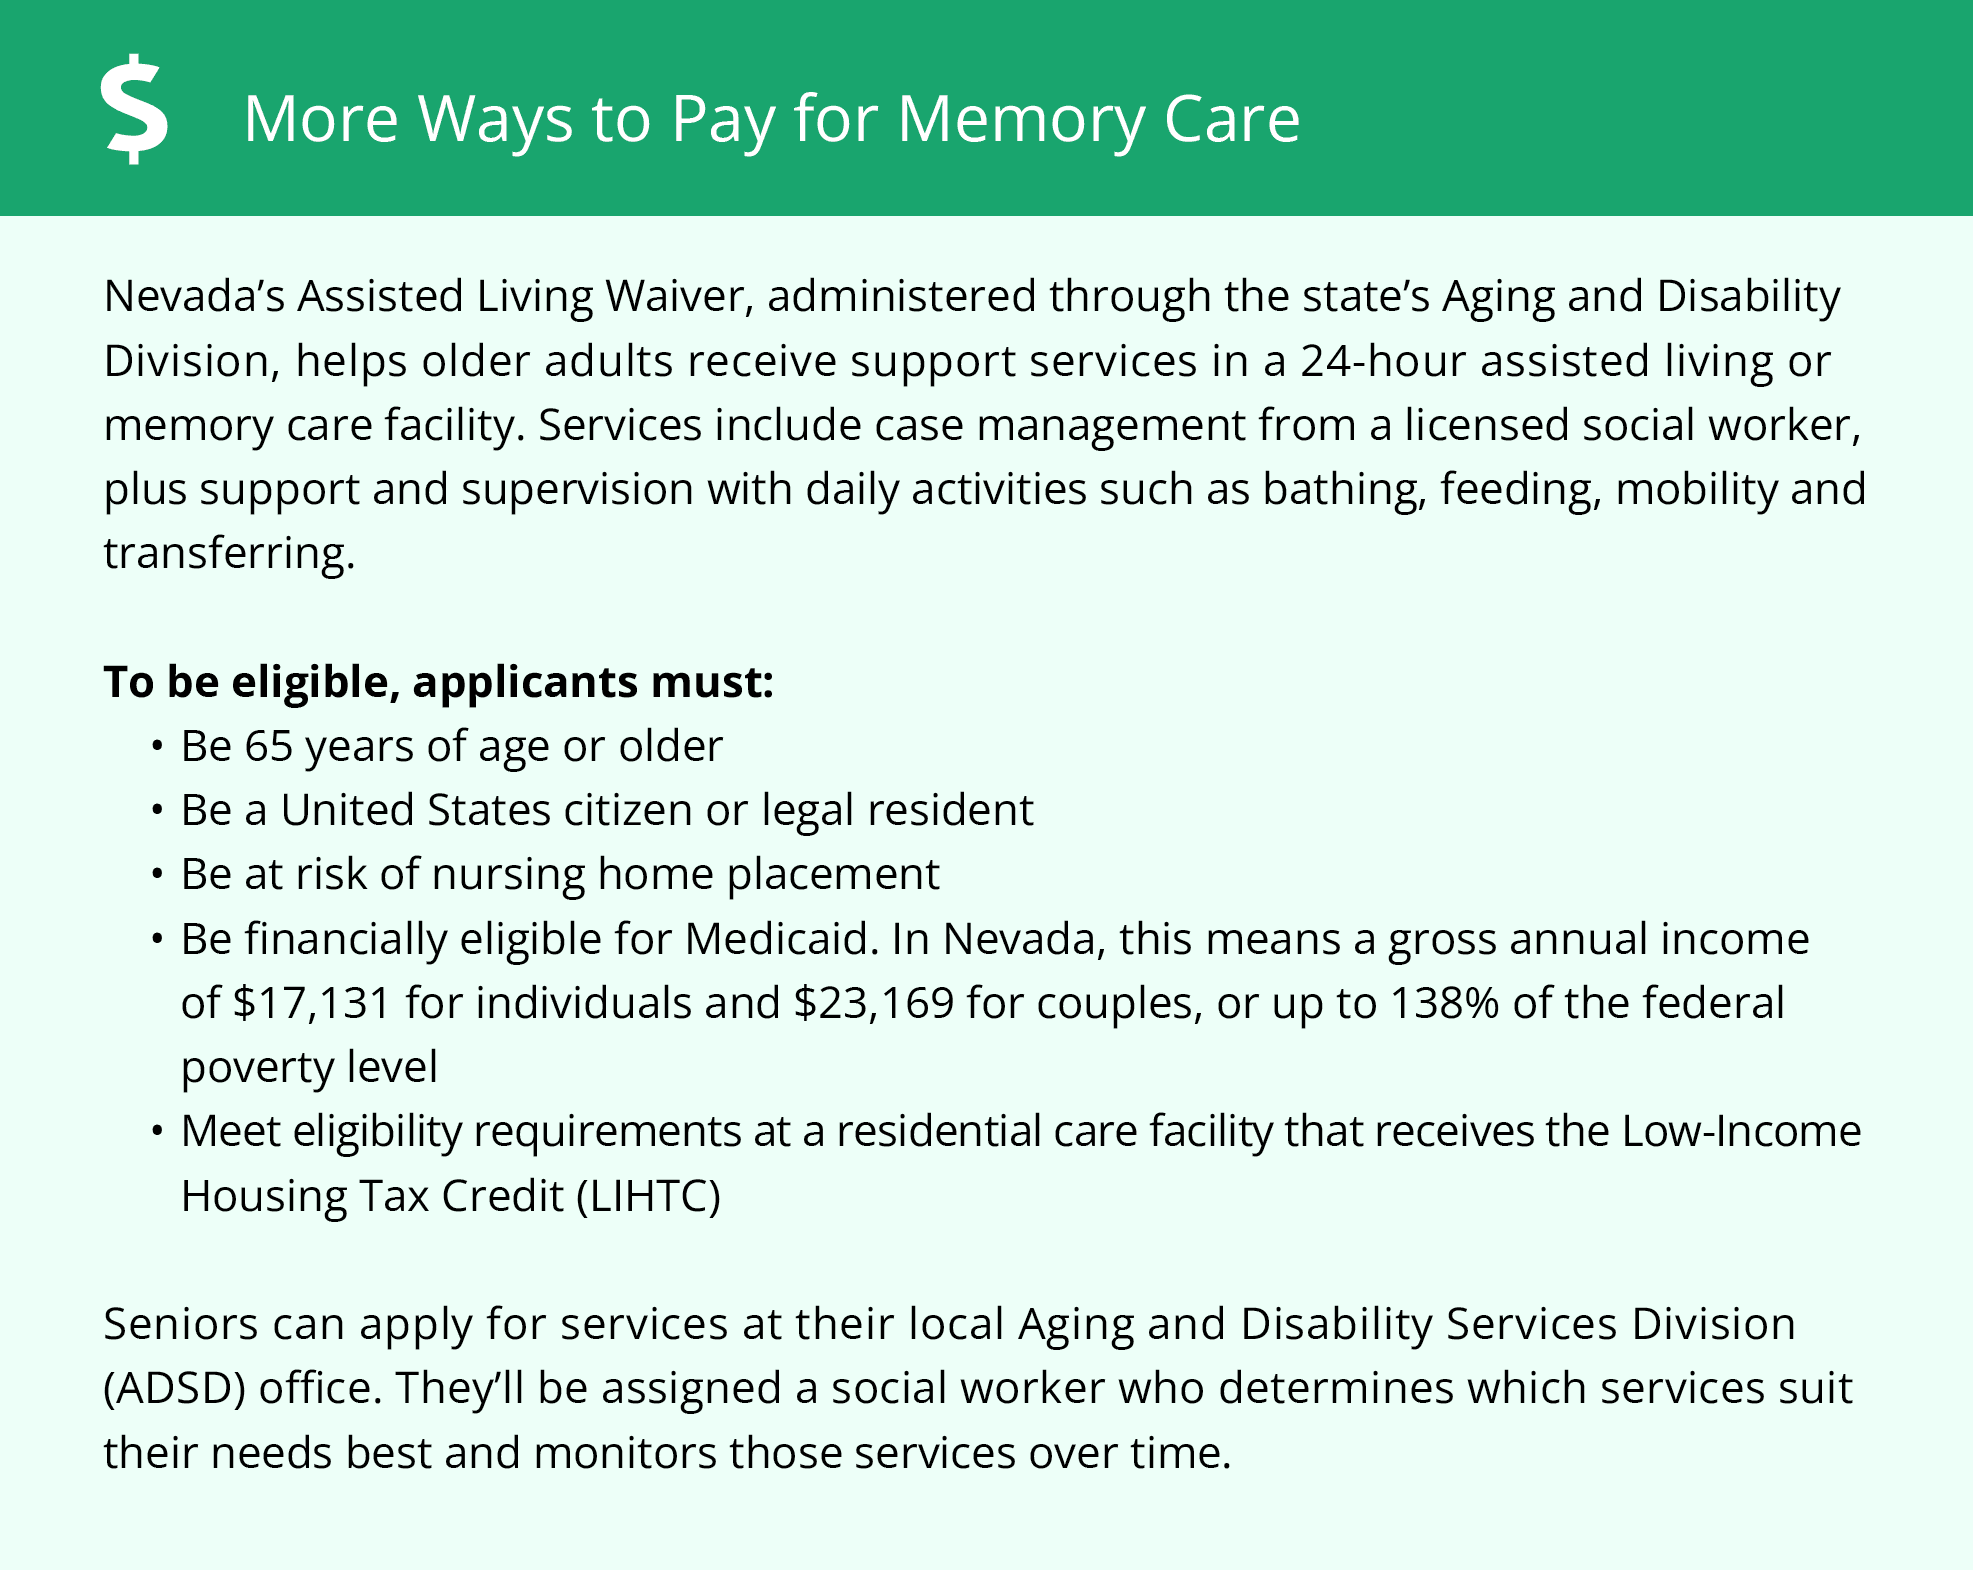 More Ways to Pay for Memory Care in Nevada